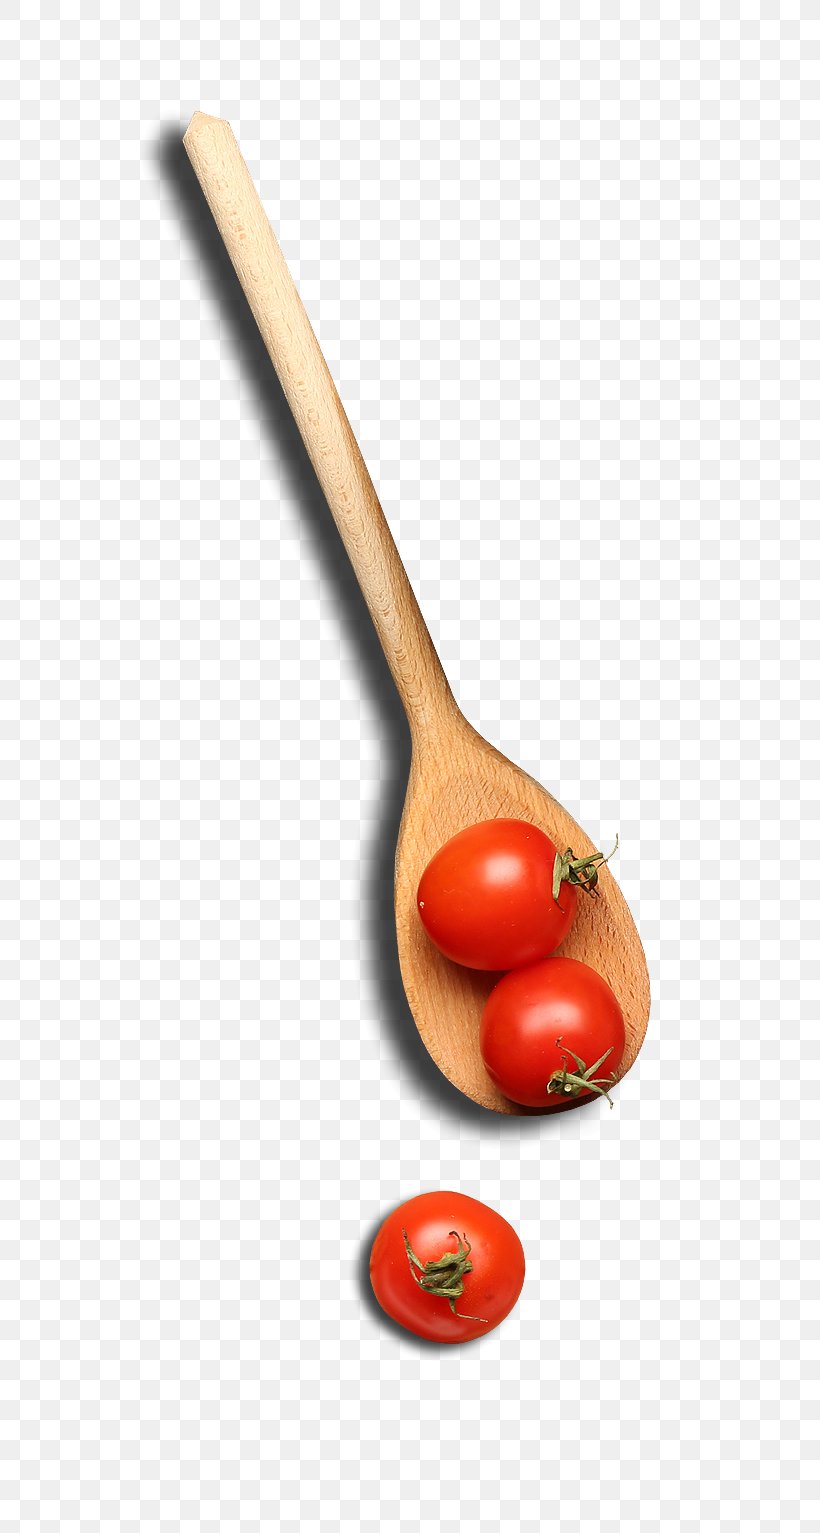 Wooden Spoon Download Google Images, PNG, 798x1533px, Spoon, Cherry Tomato, Cutlery, Food, Fork Download Free